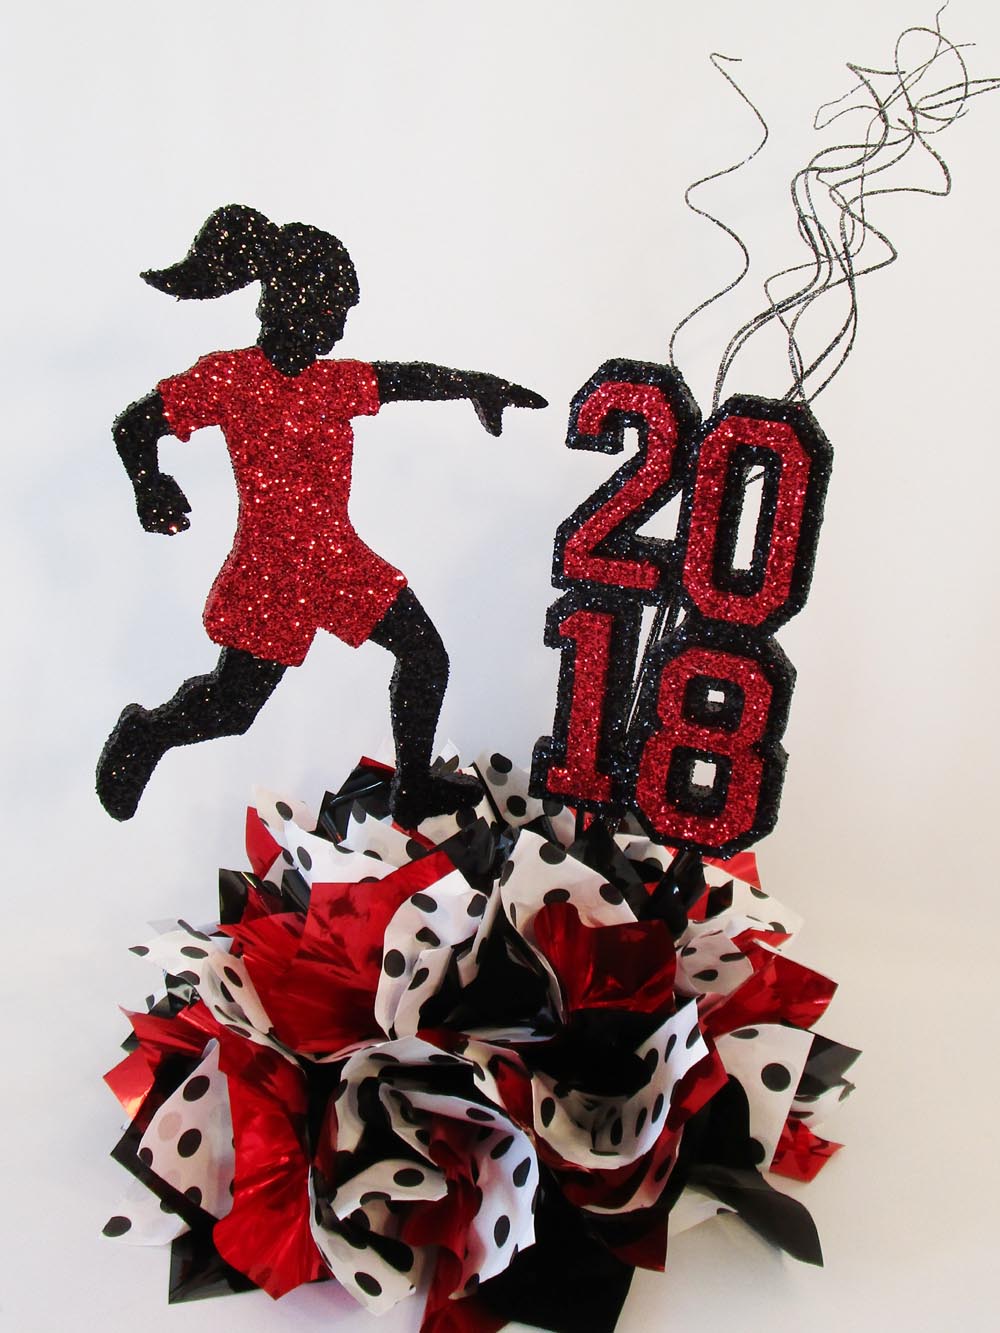 Female soccer player centerpiece - Designs by Ginny